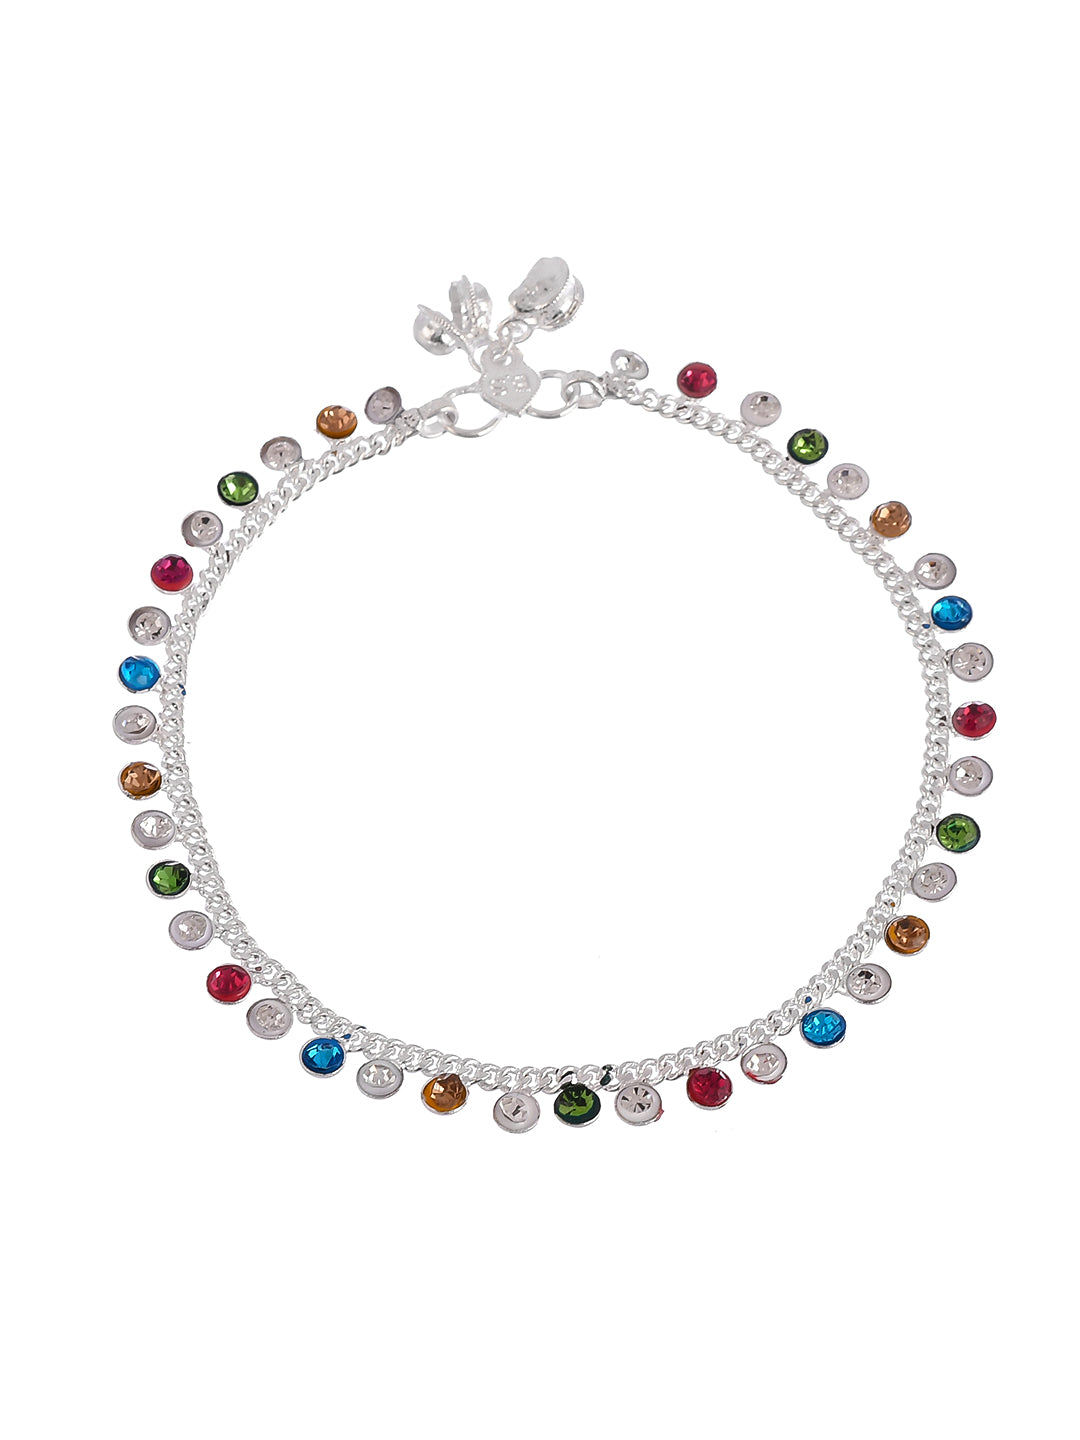 Ethnic Multistone Silver Anklets